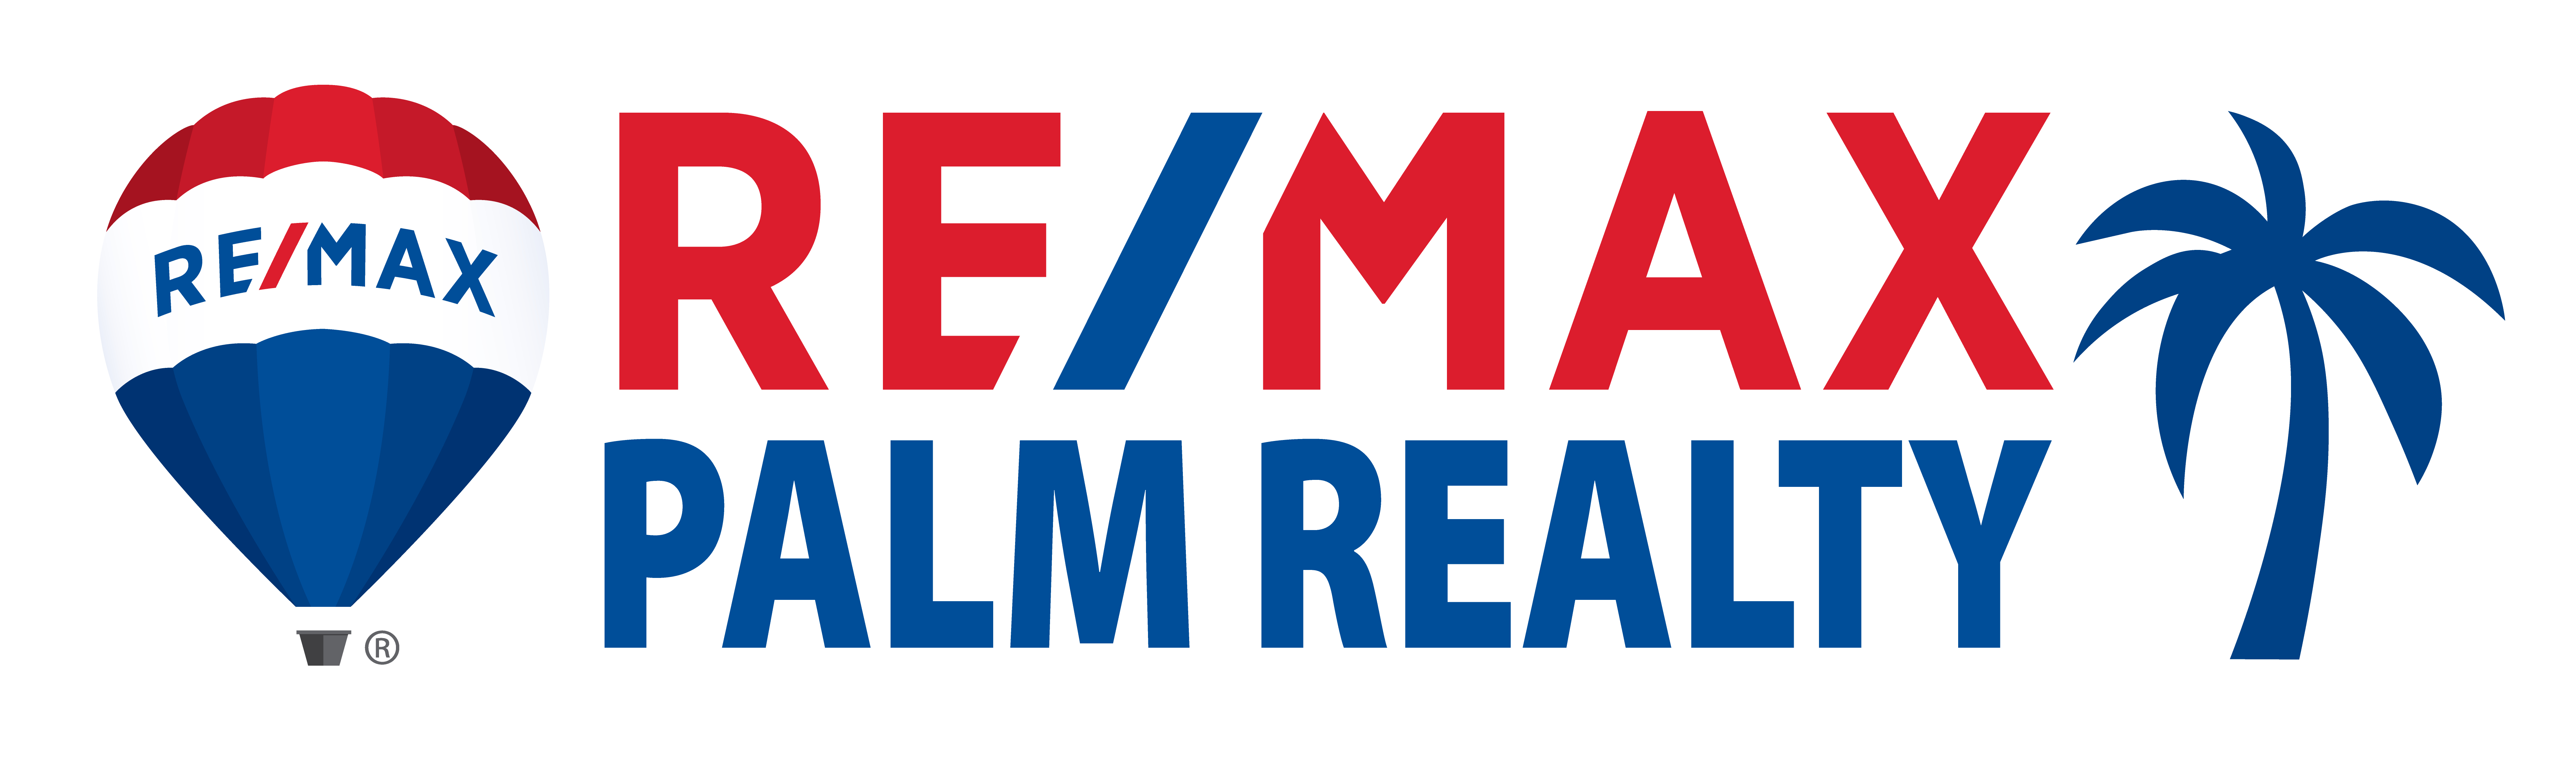 RE/MAX Palm Realty